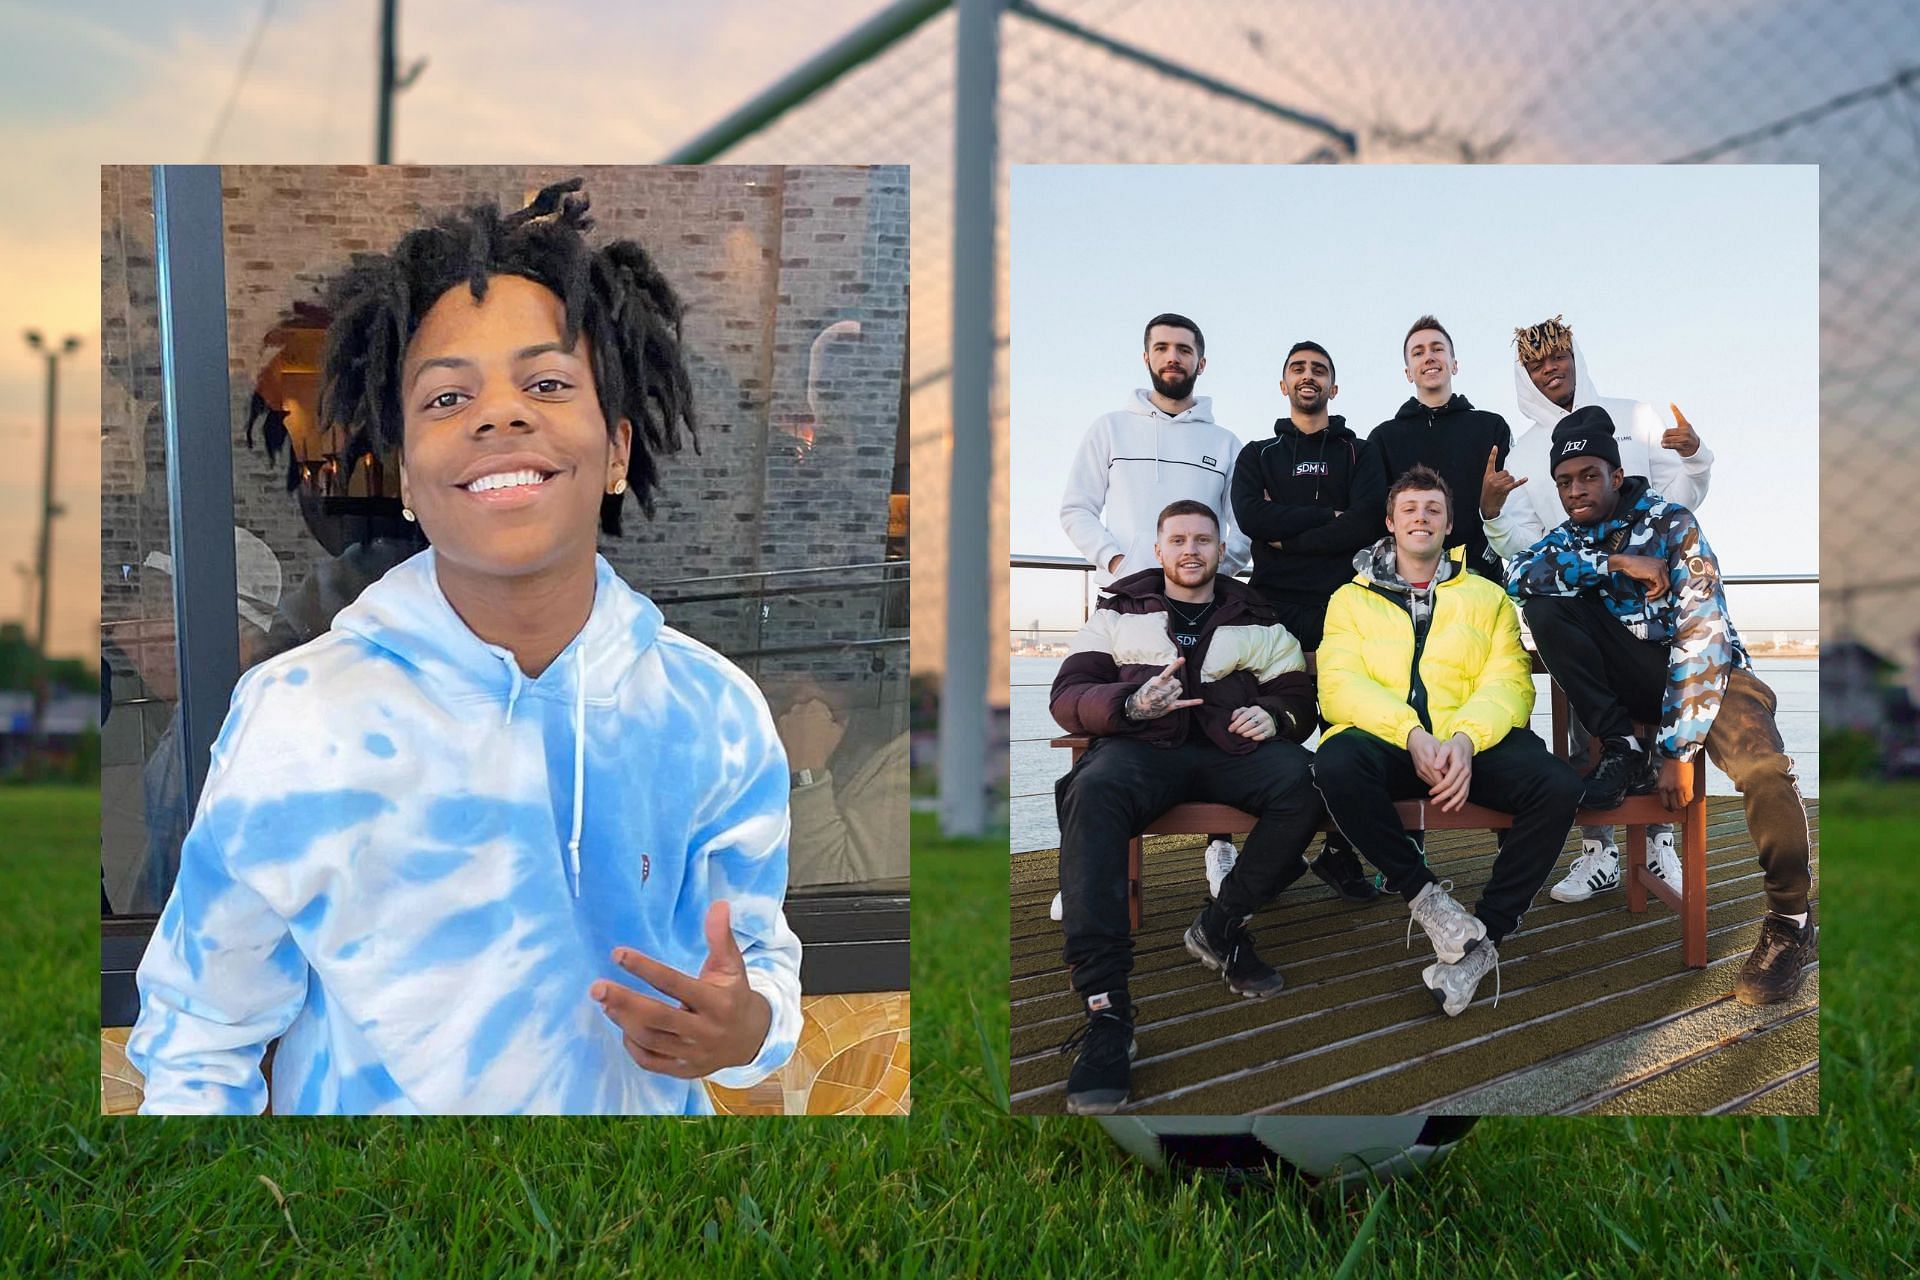 The Sidemen have confirmed that IShowSpeed will participate in their September 24 charity match (Image via Sportskeeda)